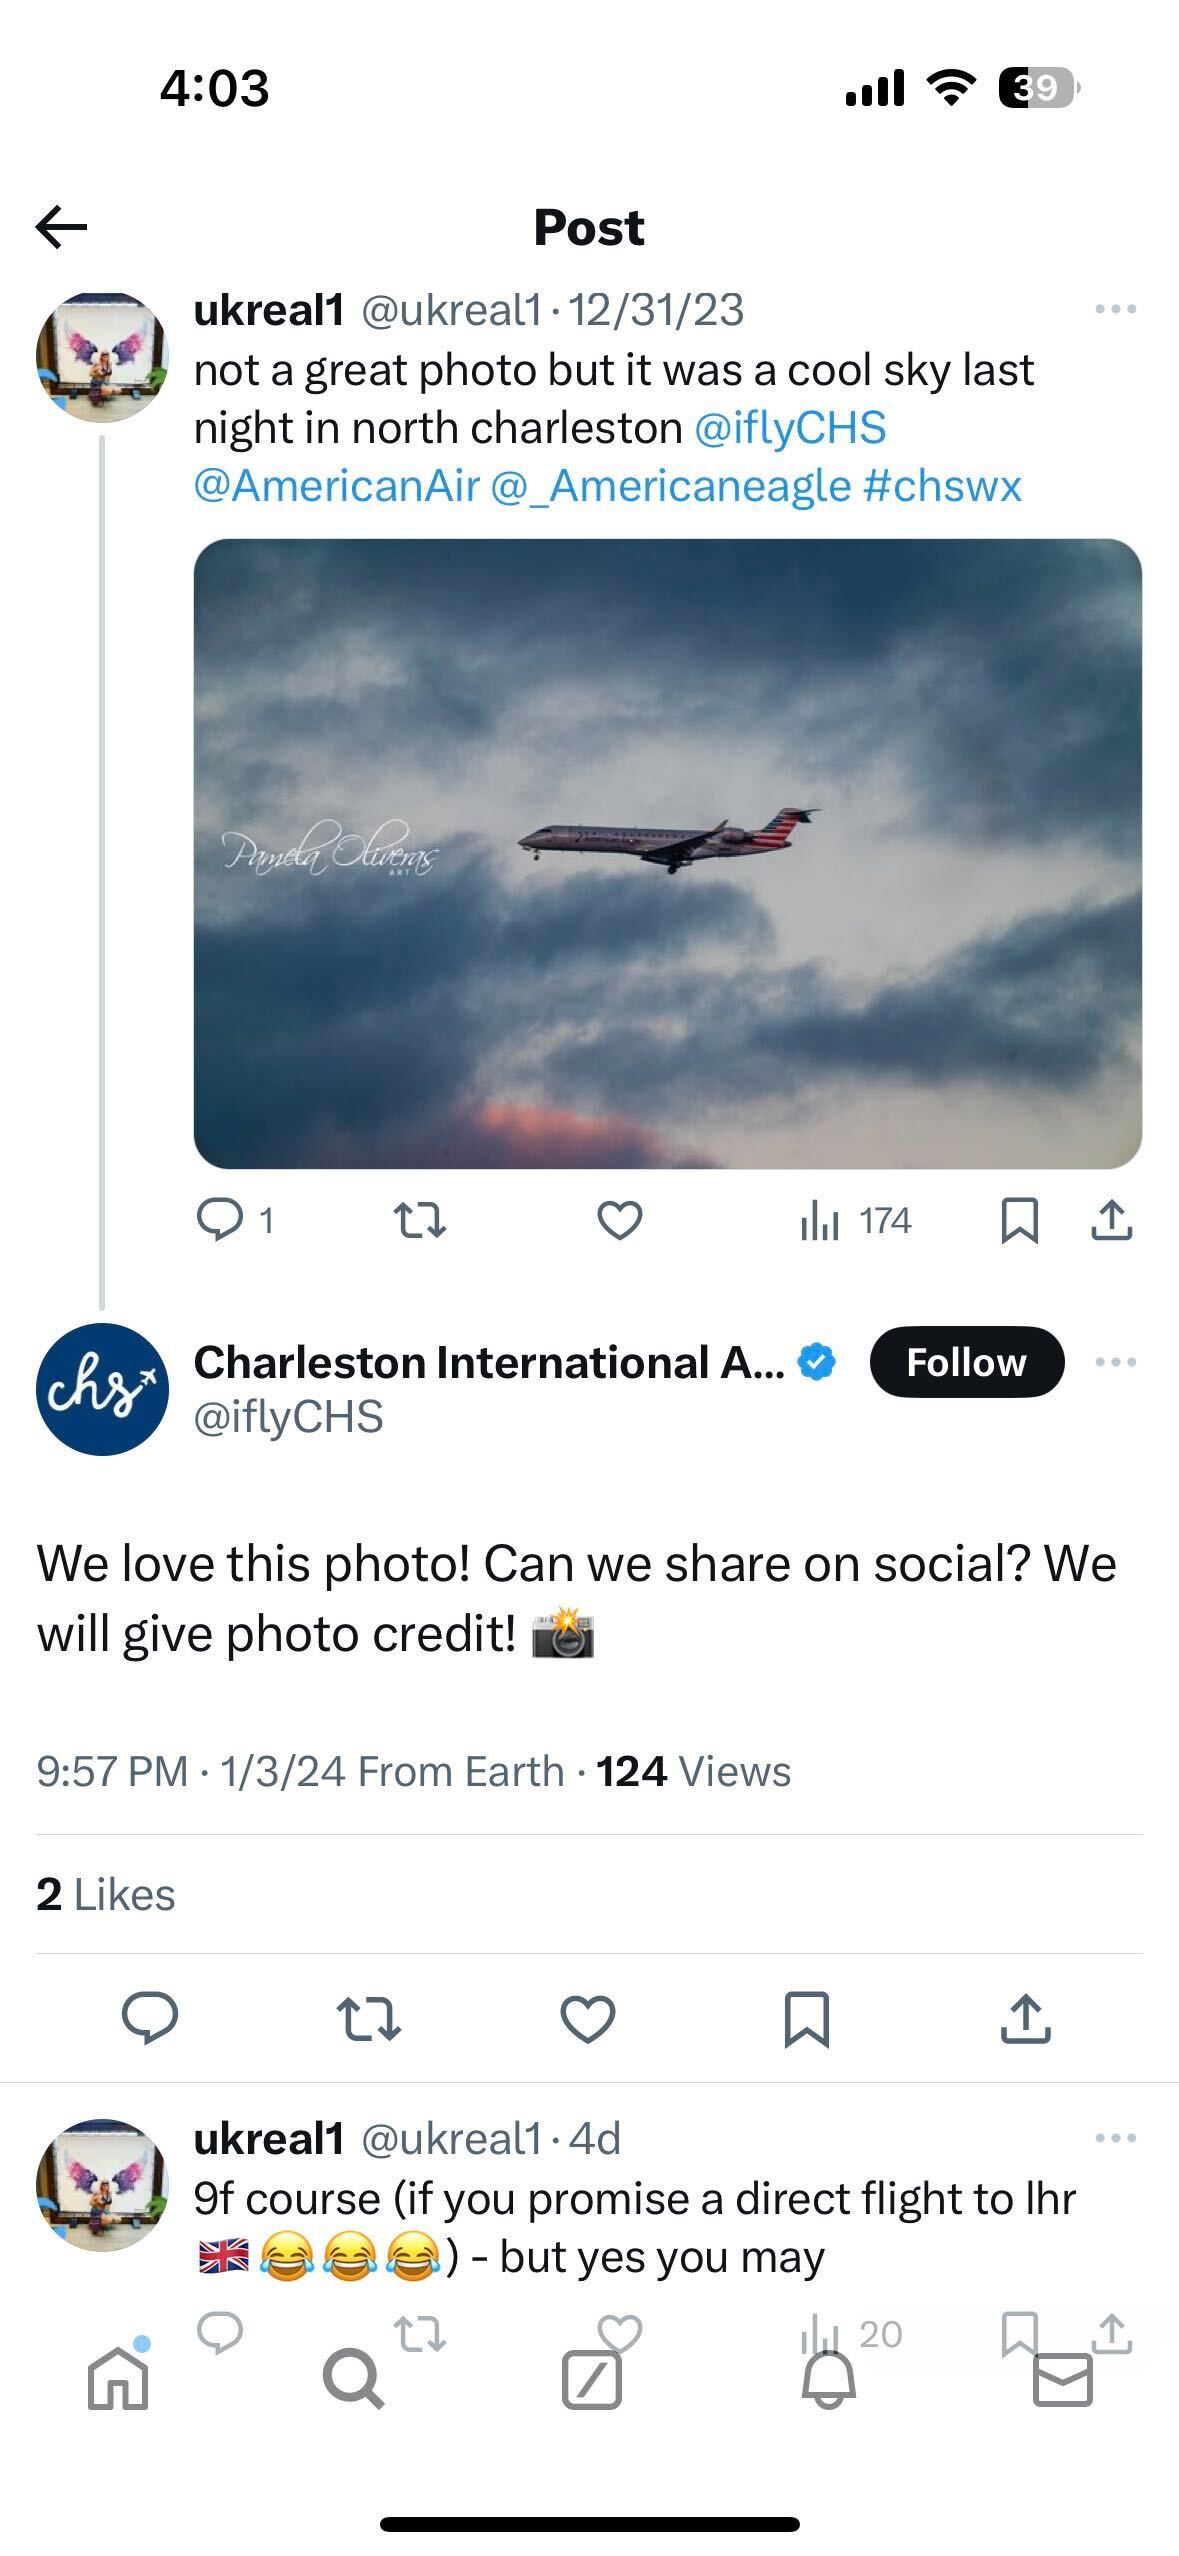 A user shares a photo of a plane coasting during sunset. The brand account for Charleston International Airport responds to the post asking if they can reshare on social.